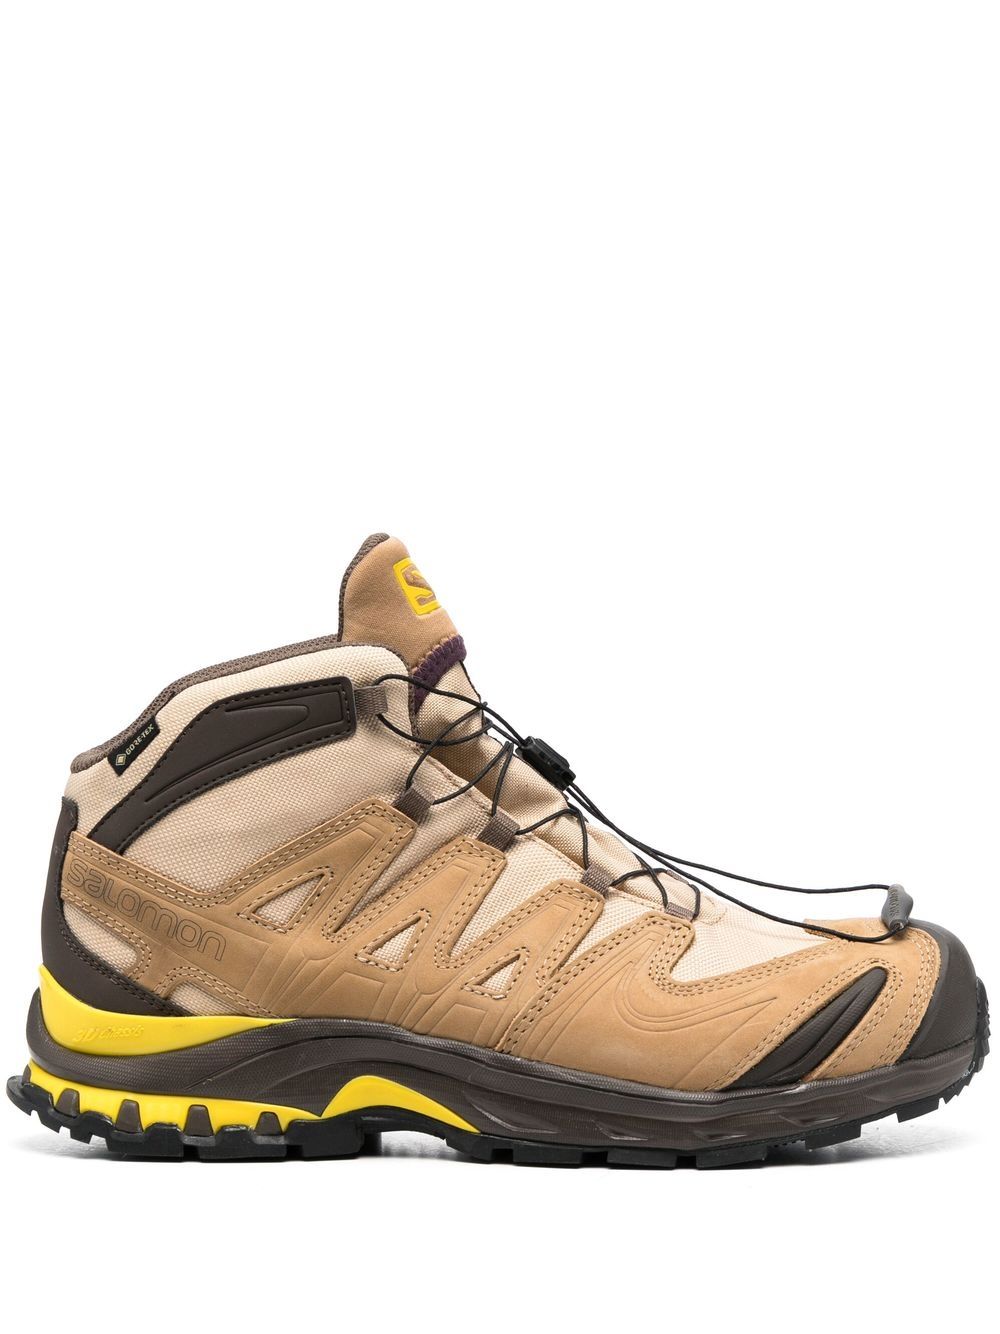 Ringlet Arbitrage Vouwen Salomon Better Gift Shop Xa Pro 3d Gore-tex®, Leather And Rubber Sneakers  In Brown | ModeSens